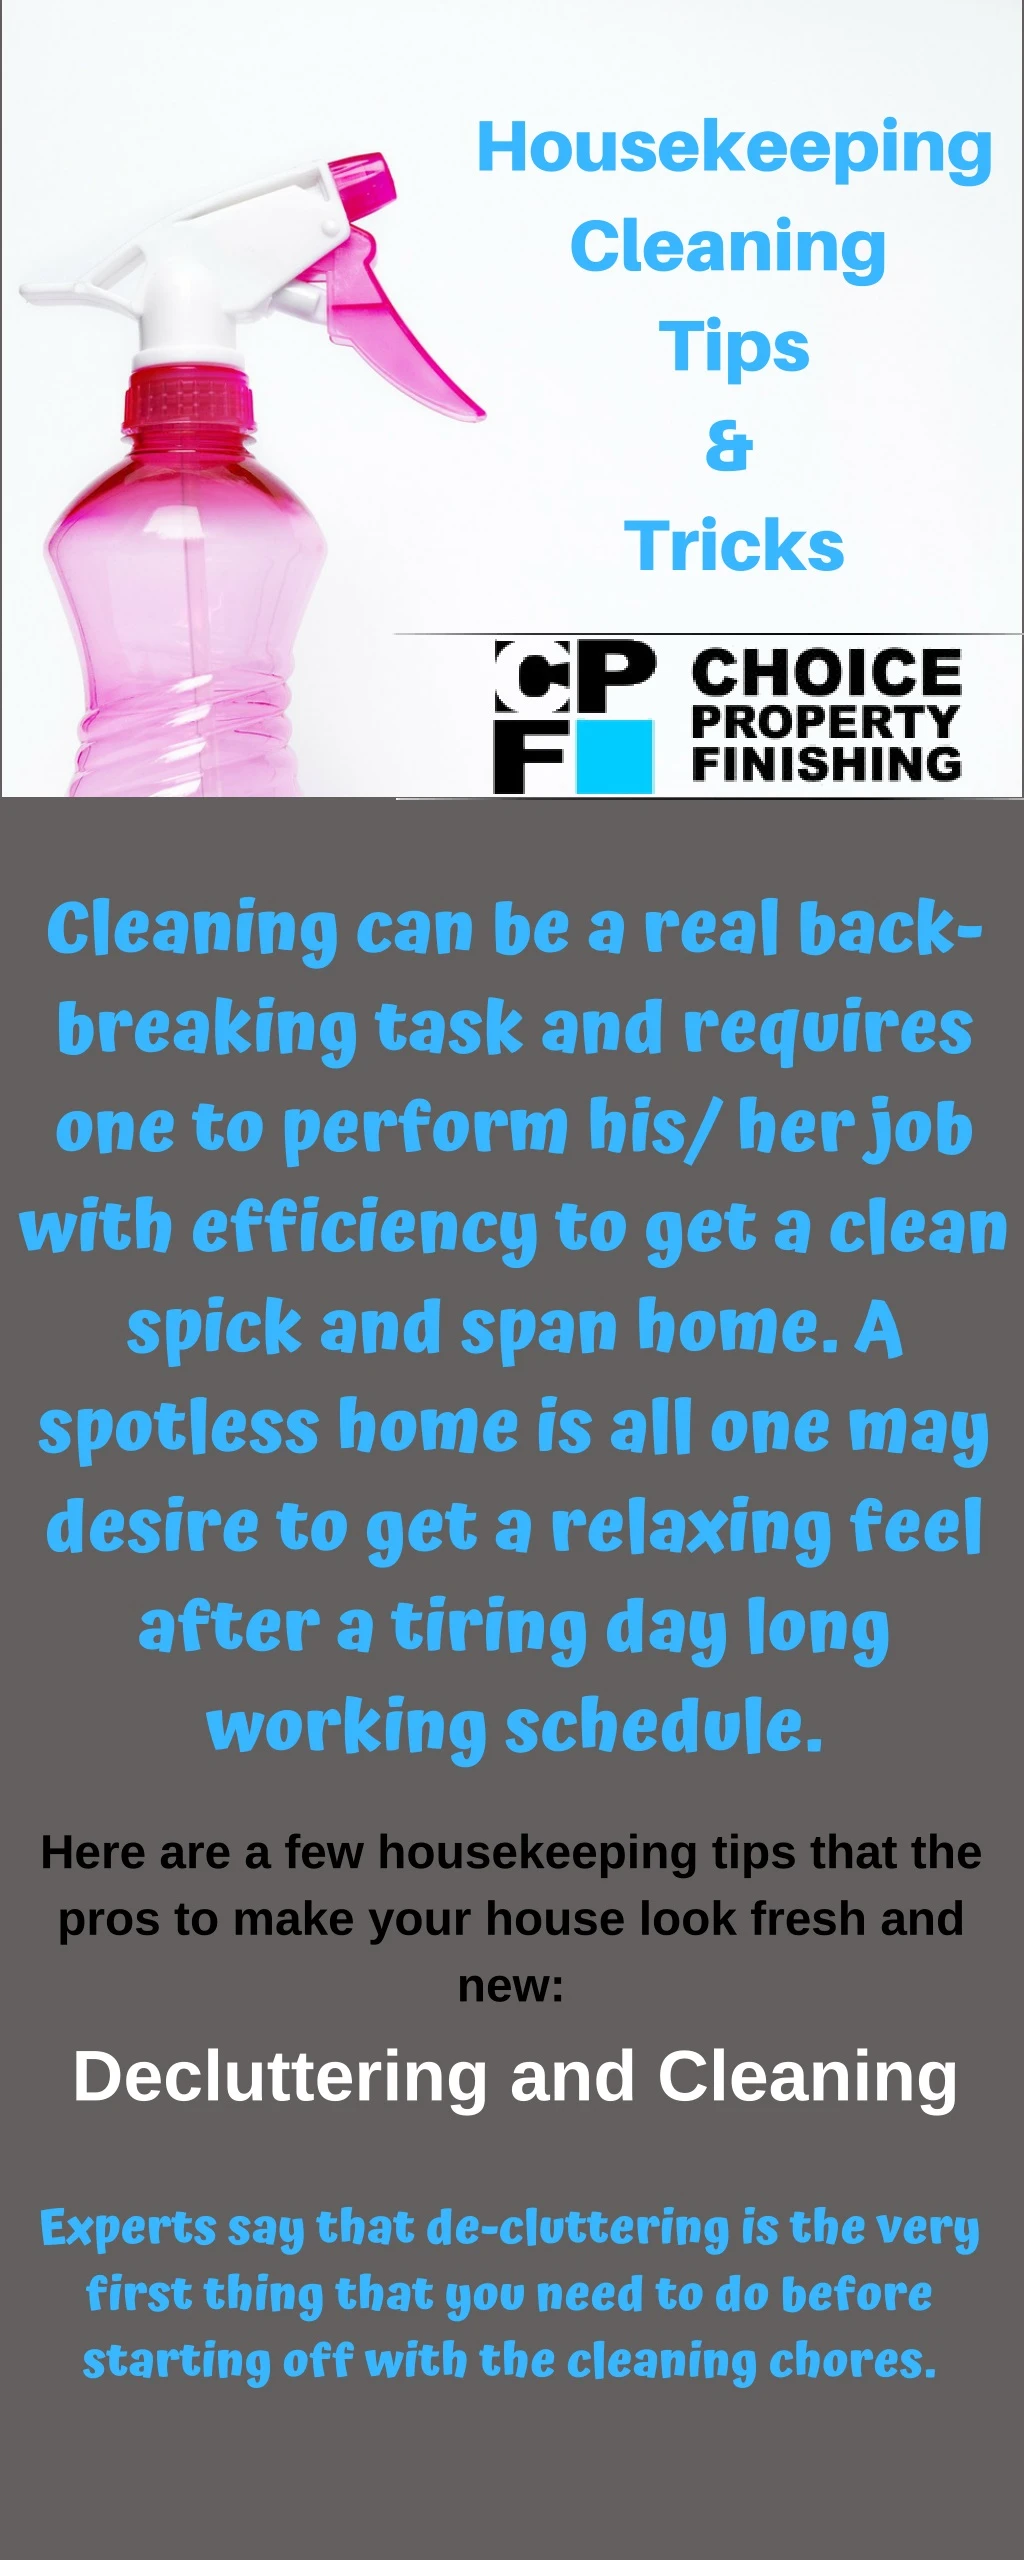 housekeeping cleaning tips